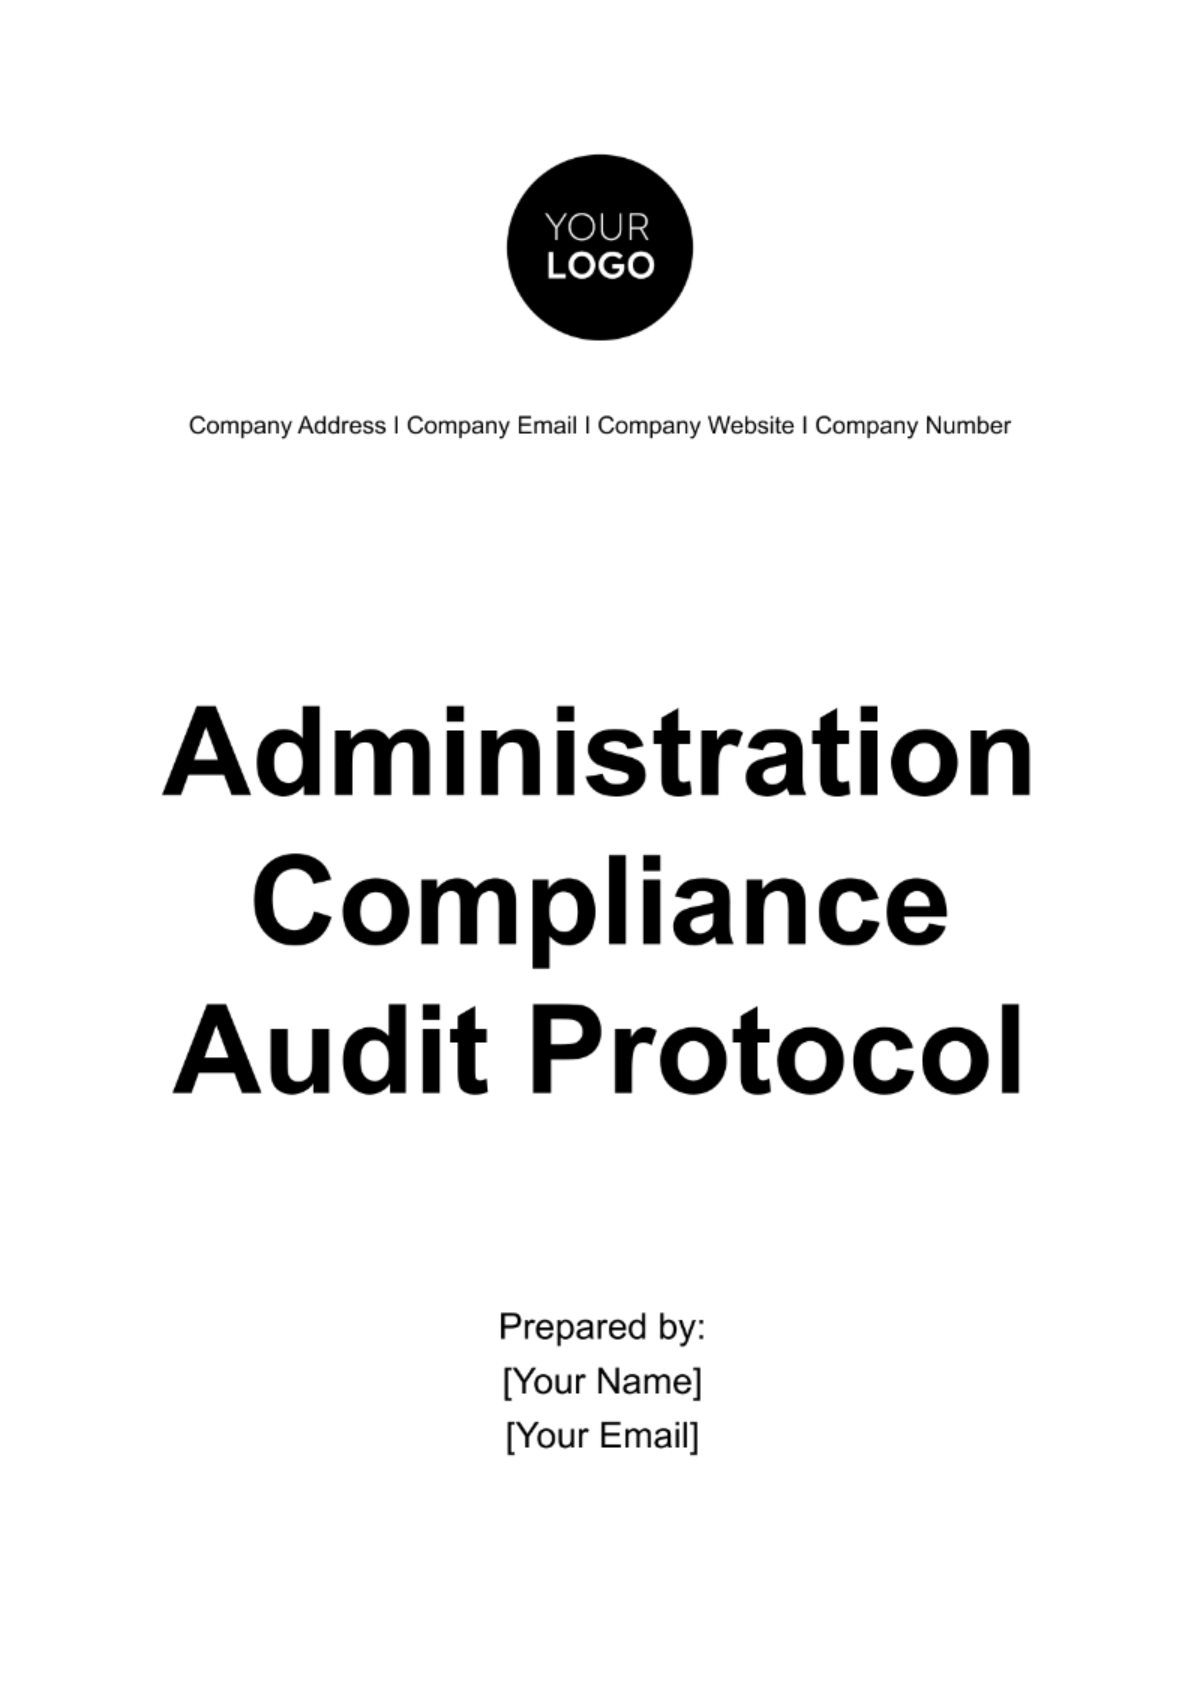 Administration Compliance Audit Protocol Template